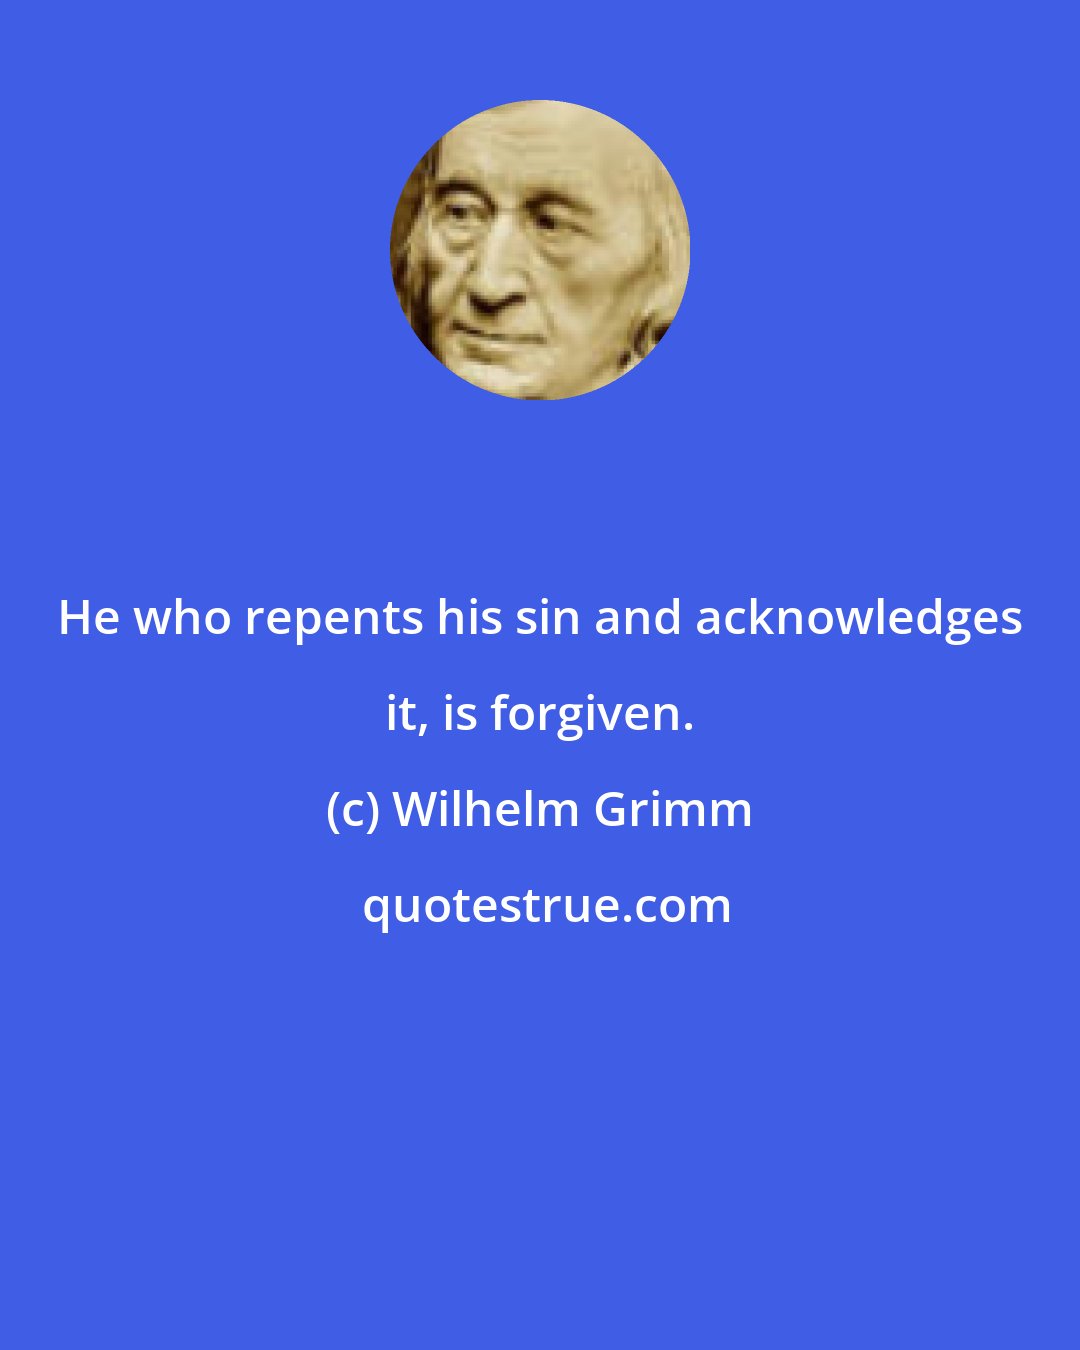 Wilhelm Grimm: He who repents his sin and acknowledges it, is forgiven.